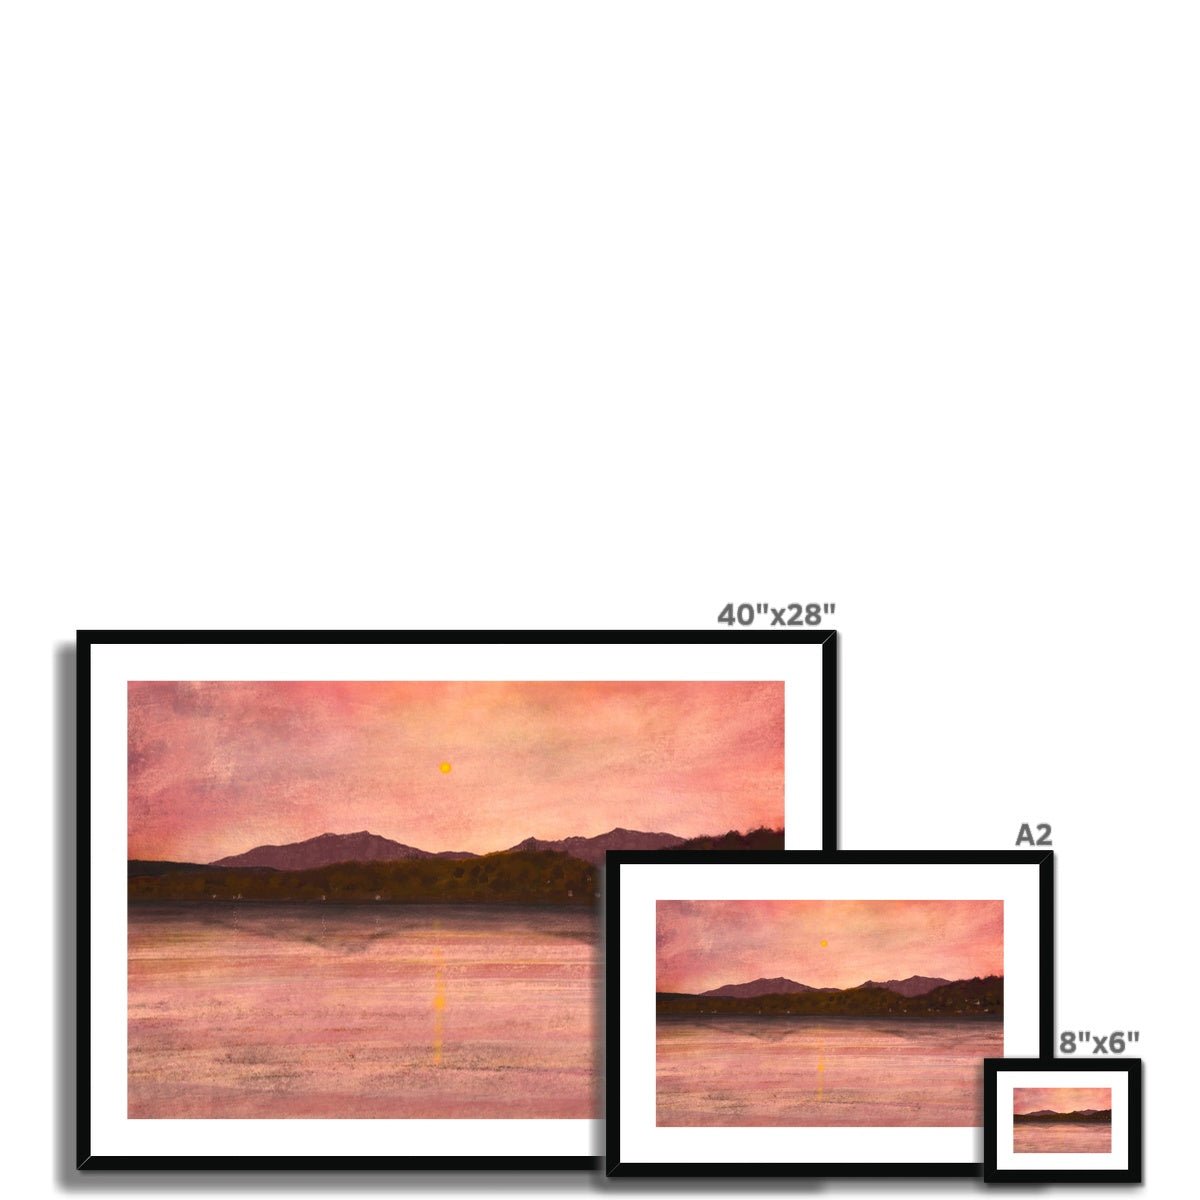 Dusk Over Arran & Bute Painting | Framed & Mounted Prints From Scotland-Framed & Mounted Prints-Arran Art Gallery-Paintings, Prints, Homeware, Art Gifts From Scotland By Scottish Artist Kevin Hunter